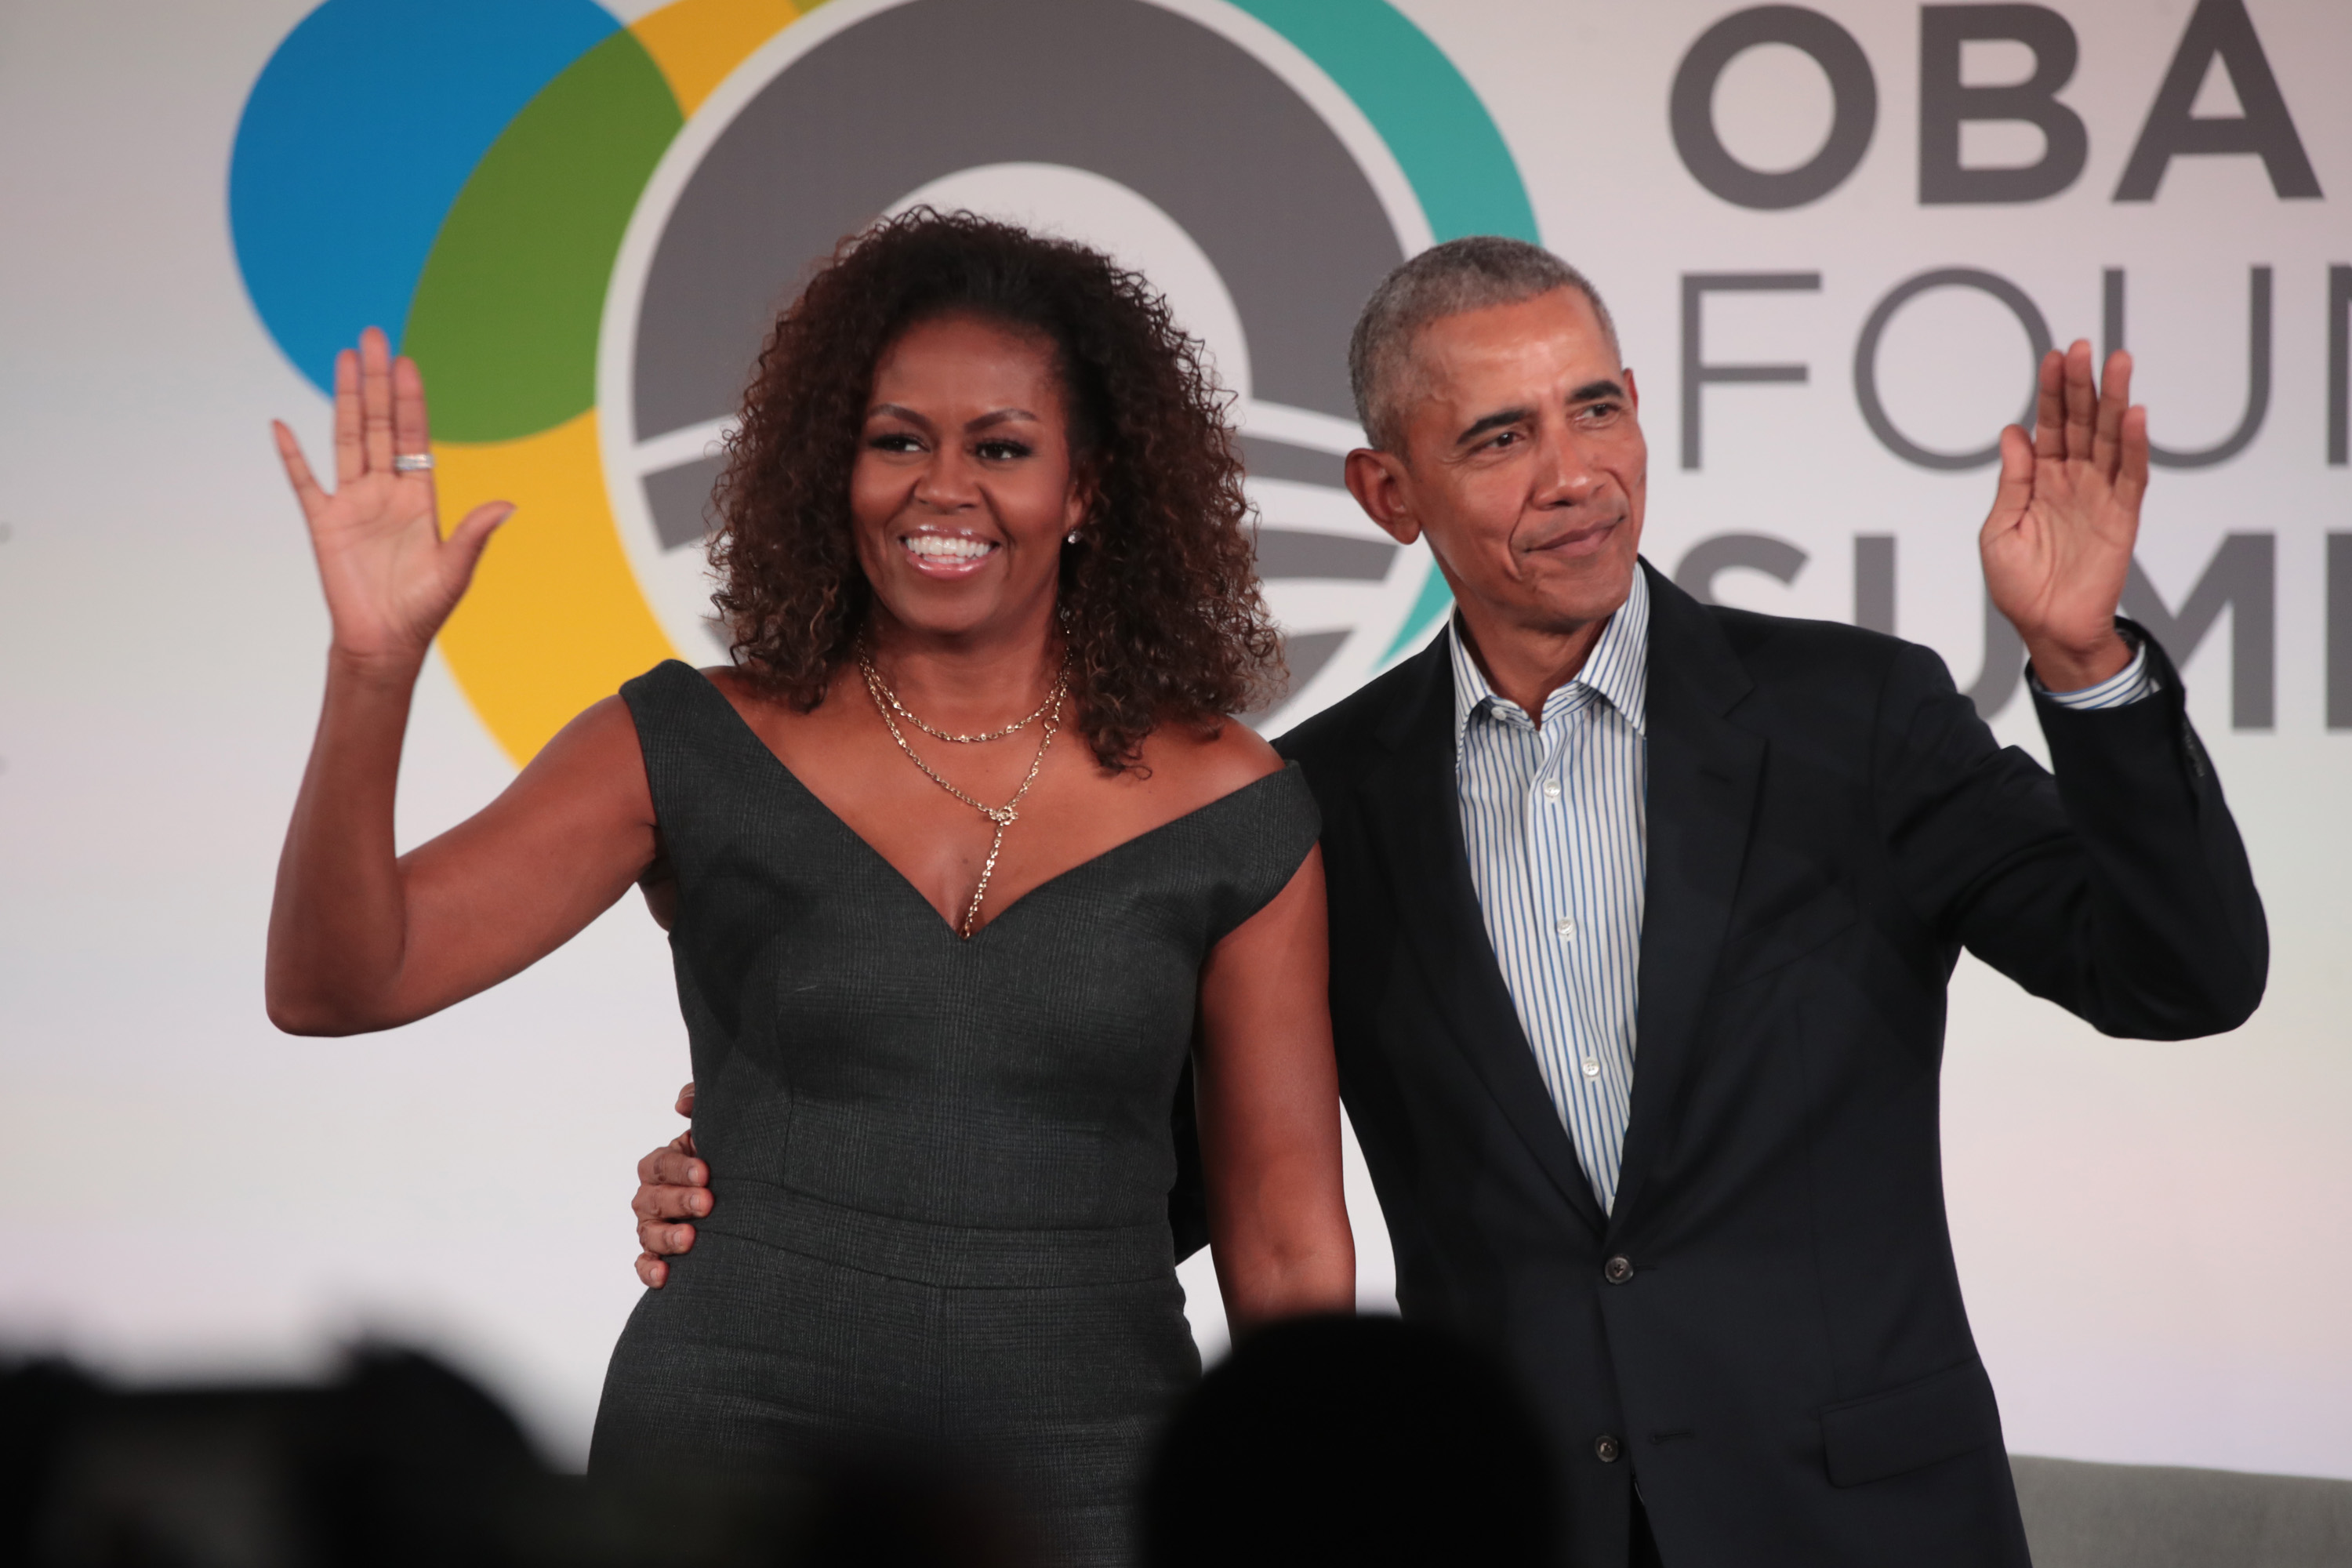 CHICAGO, ILLINOIS - OCTOBER 29: Former U.S. President Barack Obama and his wife Michelle close the Obama Foundation Summit together on the campus of the Illinois Institute of Technology on October 29, 2019 in Chicago, Illinois. The Summit is an annual event hosted by the Obama Foundation. (Photo by Scott Olson/Getty Images)